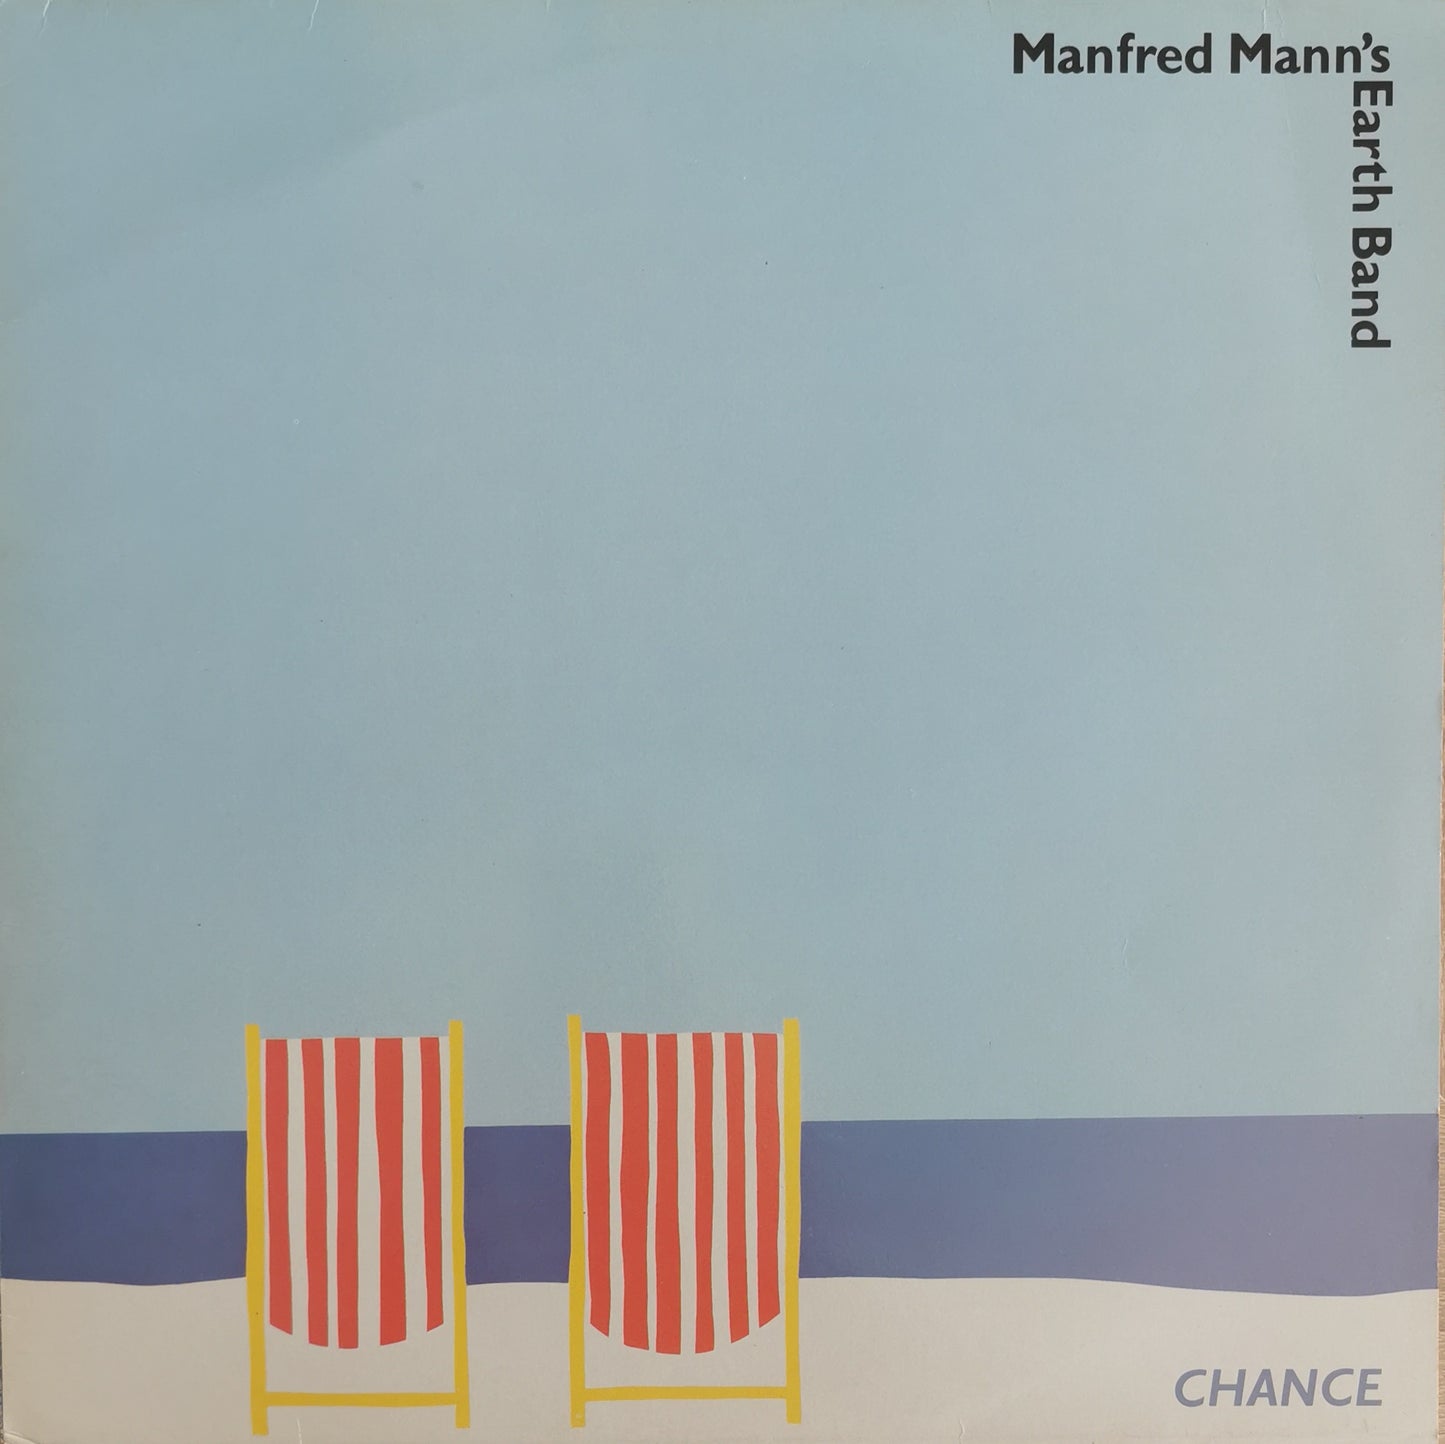 MANFRED MANN'S EARTH BAND - Change